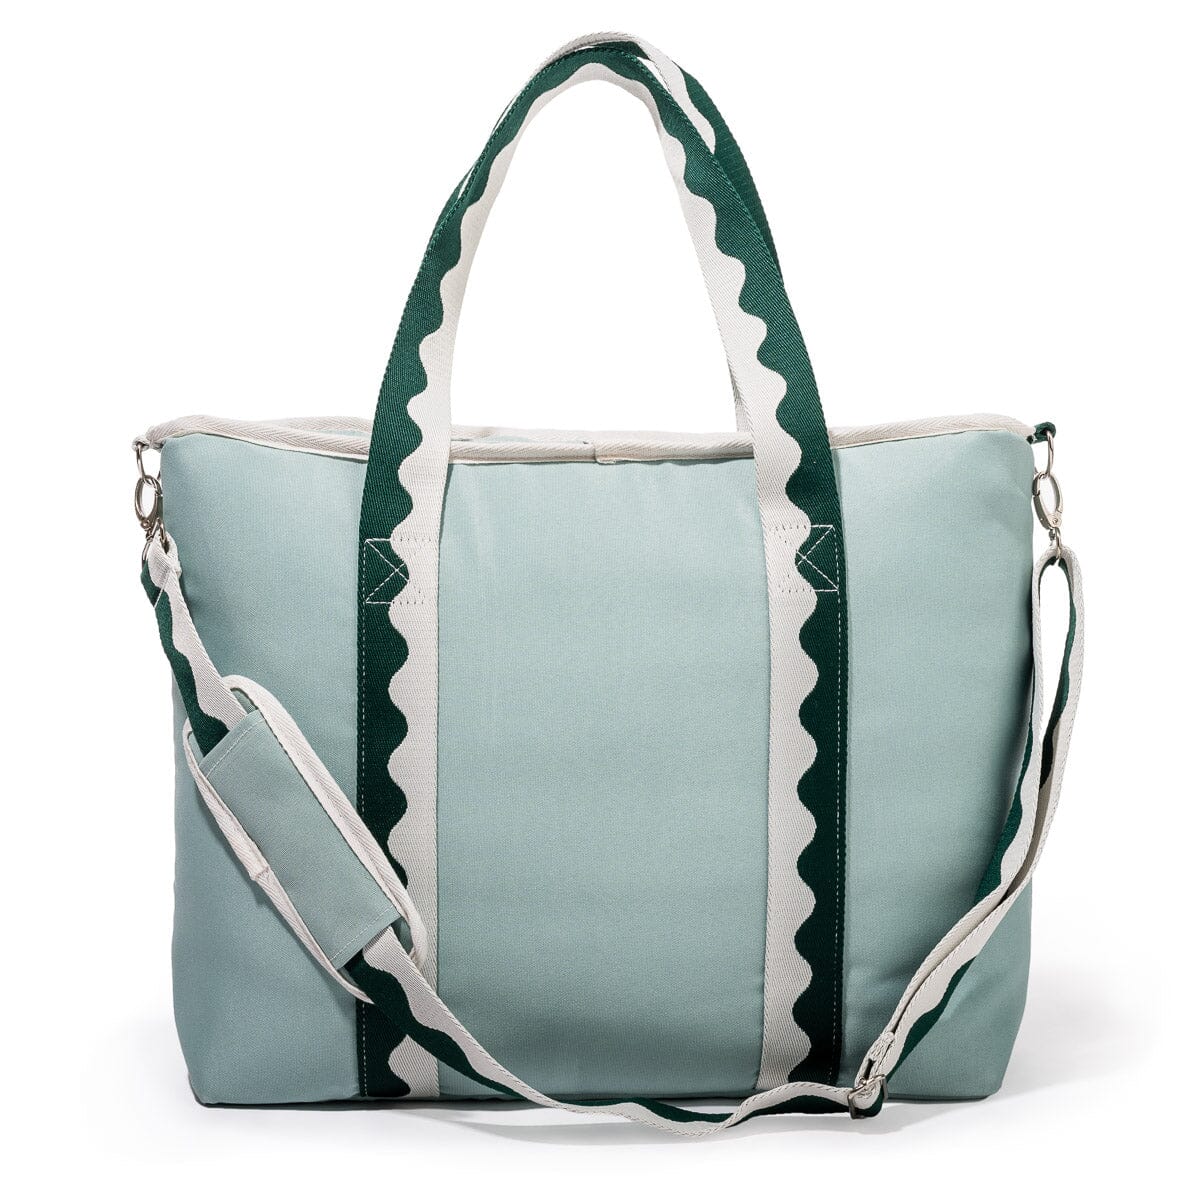 The Cooler Tote Bag - Rivie Green Cooler Tote Business & Pleasure Co. 